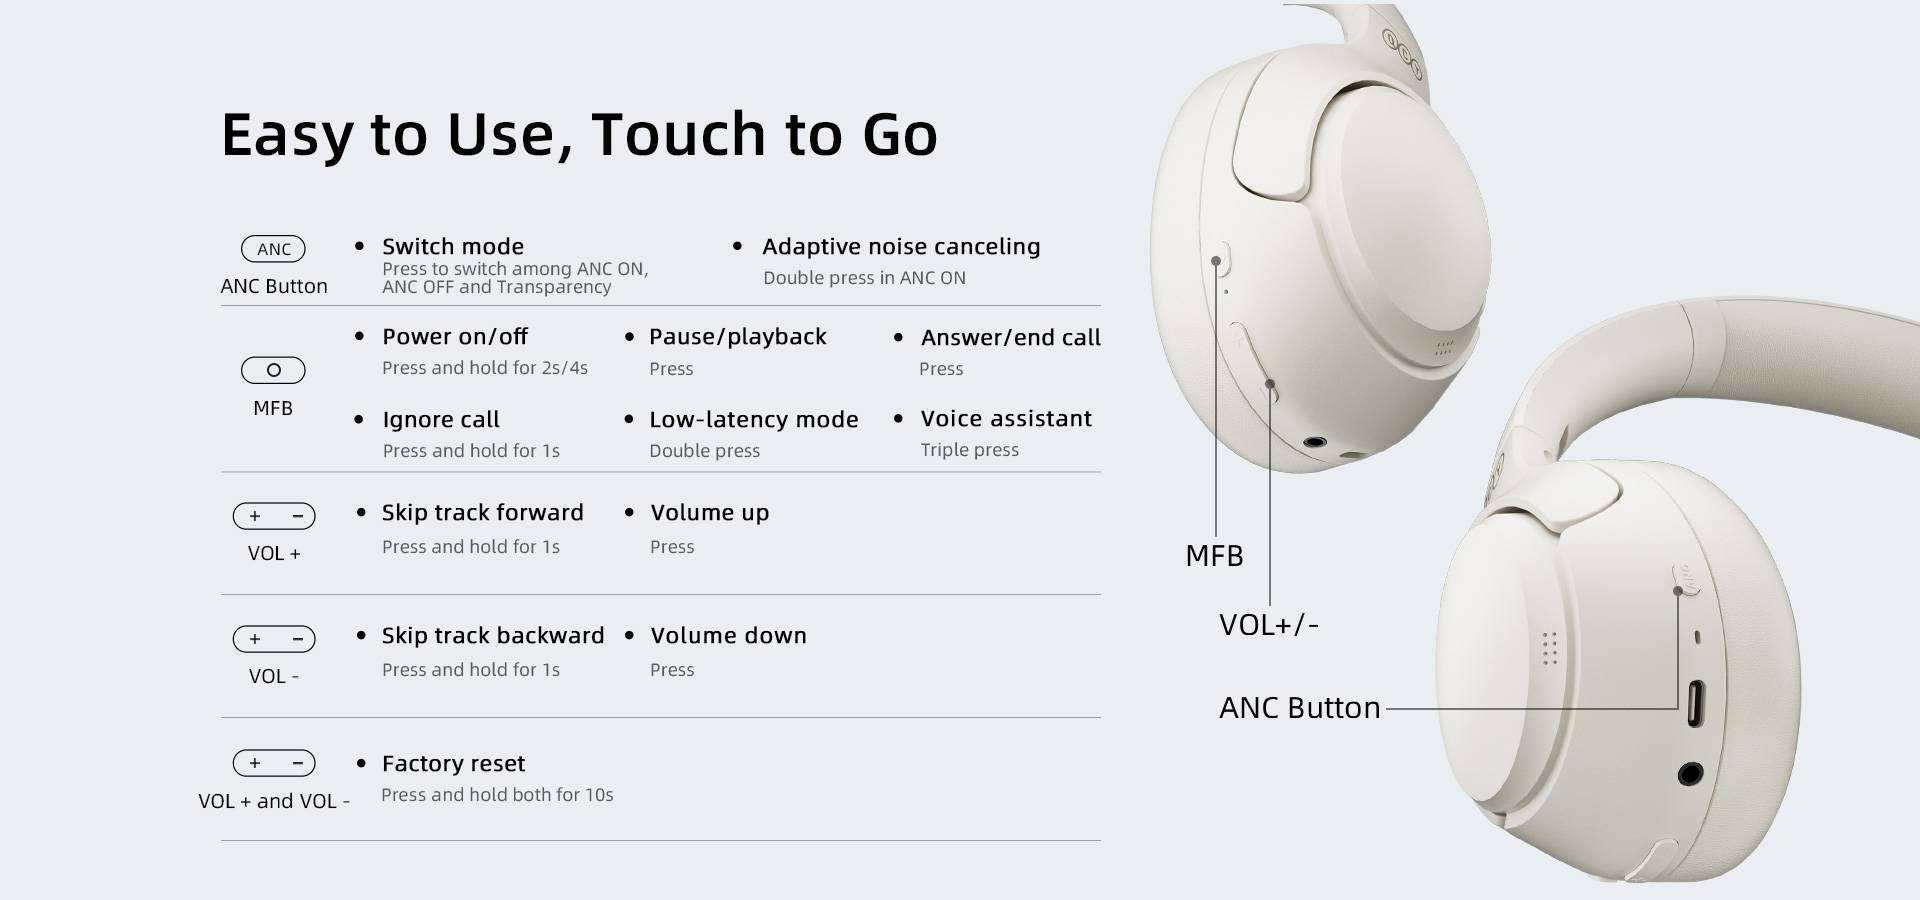 QCY - 🌵43dB hybrid-feed ANC 🔥Bimodal ear canal adaptive technoloy 🍀3-mic  Very Deep Convolutional Neural Networks(VDCNN) 🐳4 noise canceling modes  for different scenarios 🤩60-hour battery life 🎍Multi-point connection -  Connected to two